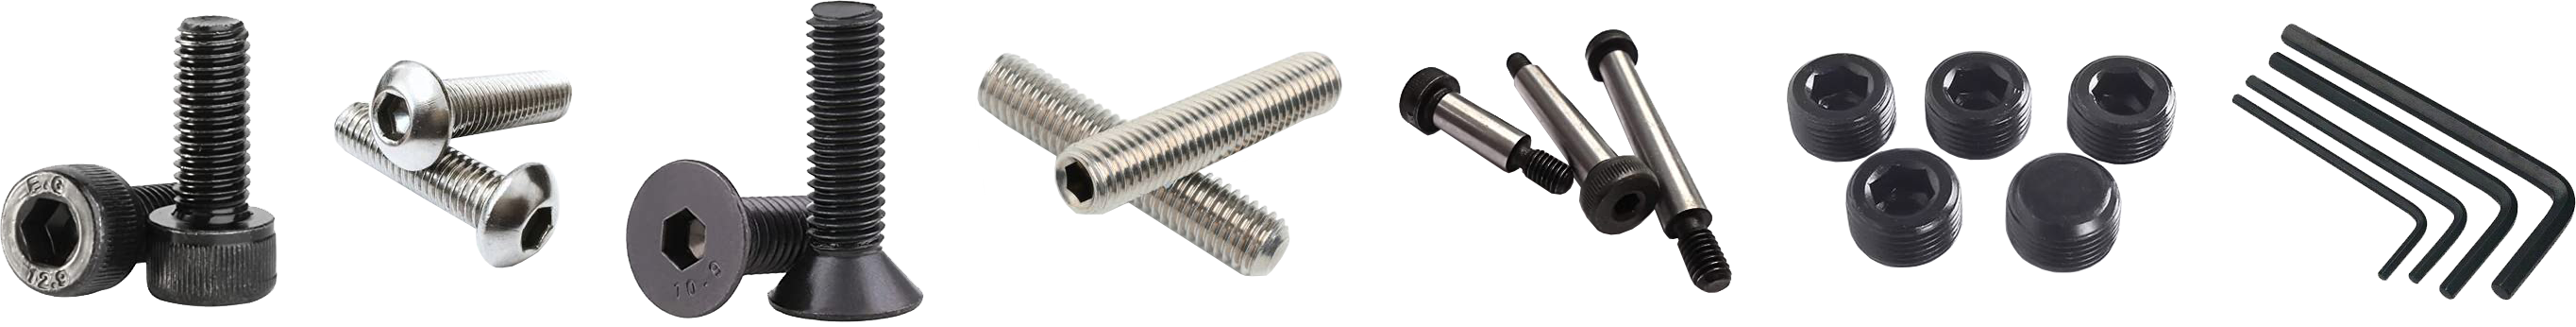 Socket products - screws and bolts from Challenge Europe